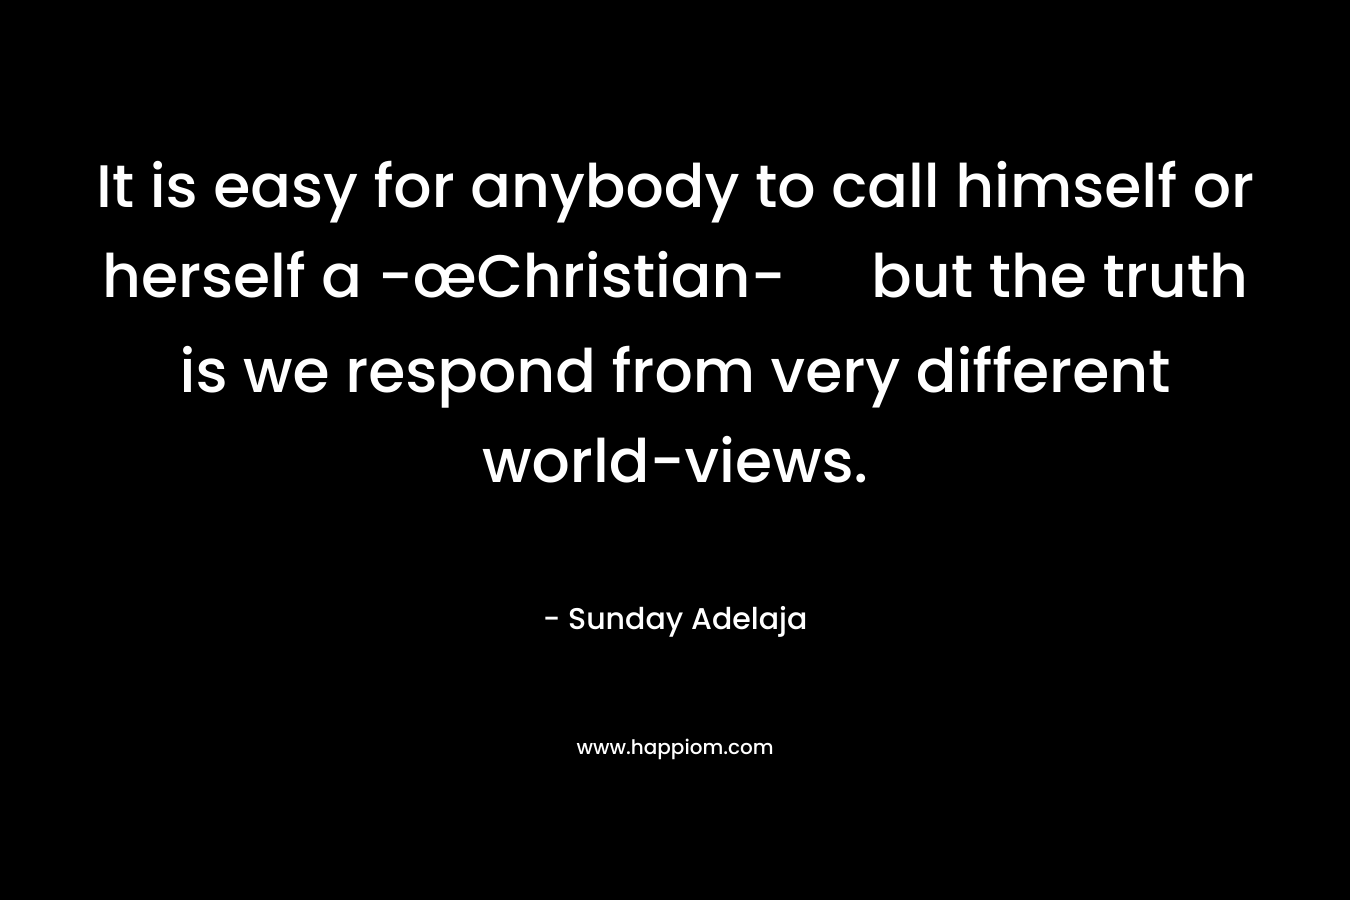 It is easy for anybody to call himself or herself a -œChristian- but the truth is we respond from very different world-views.